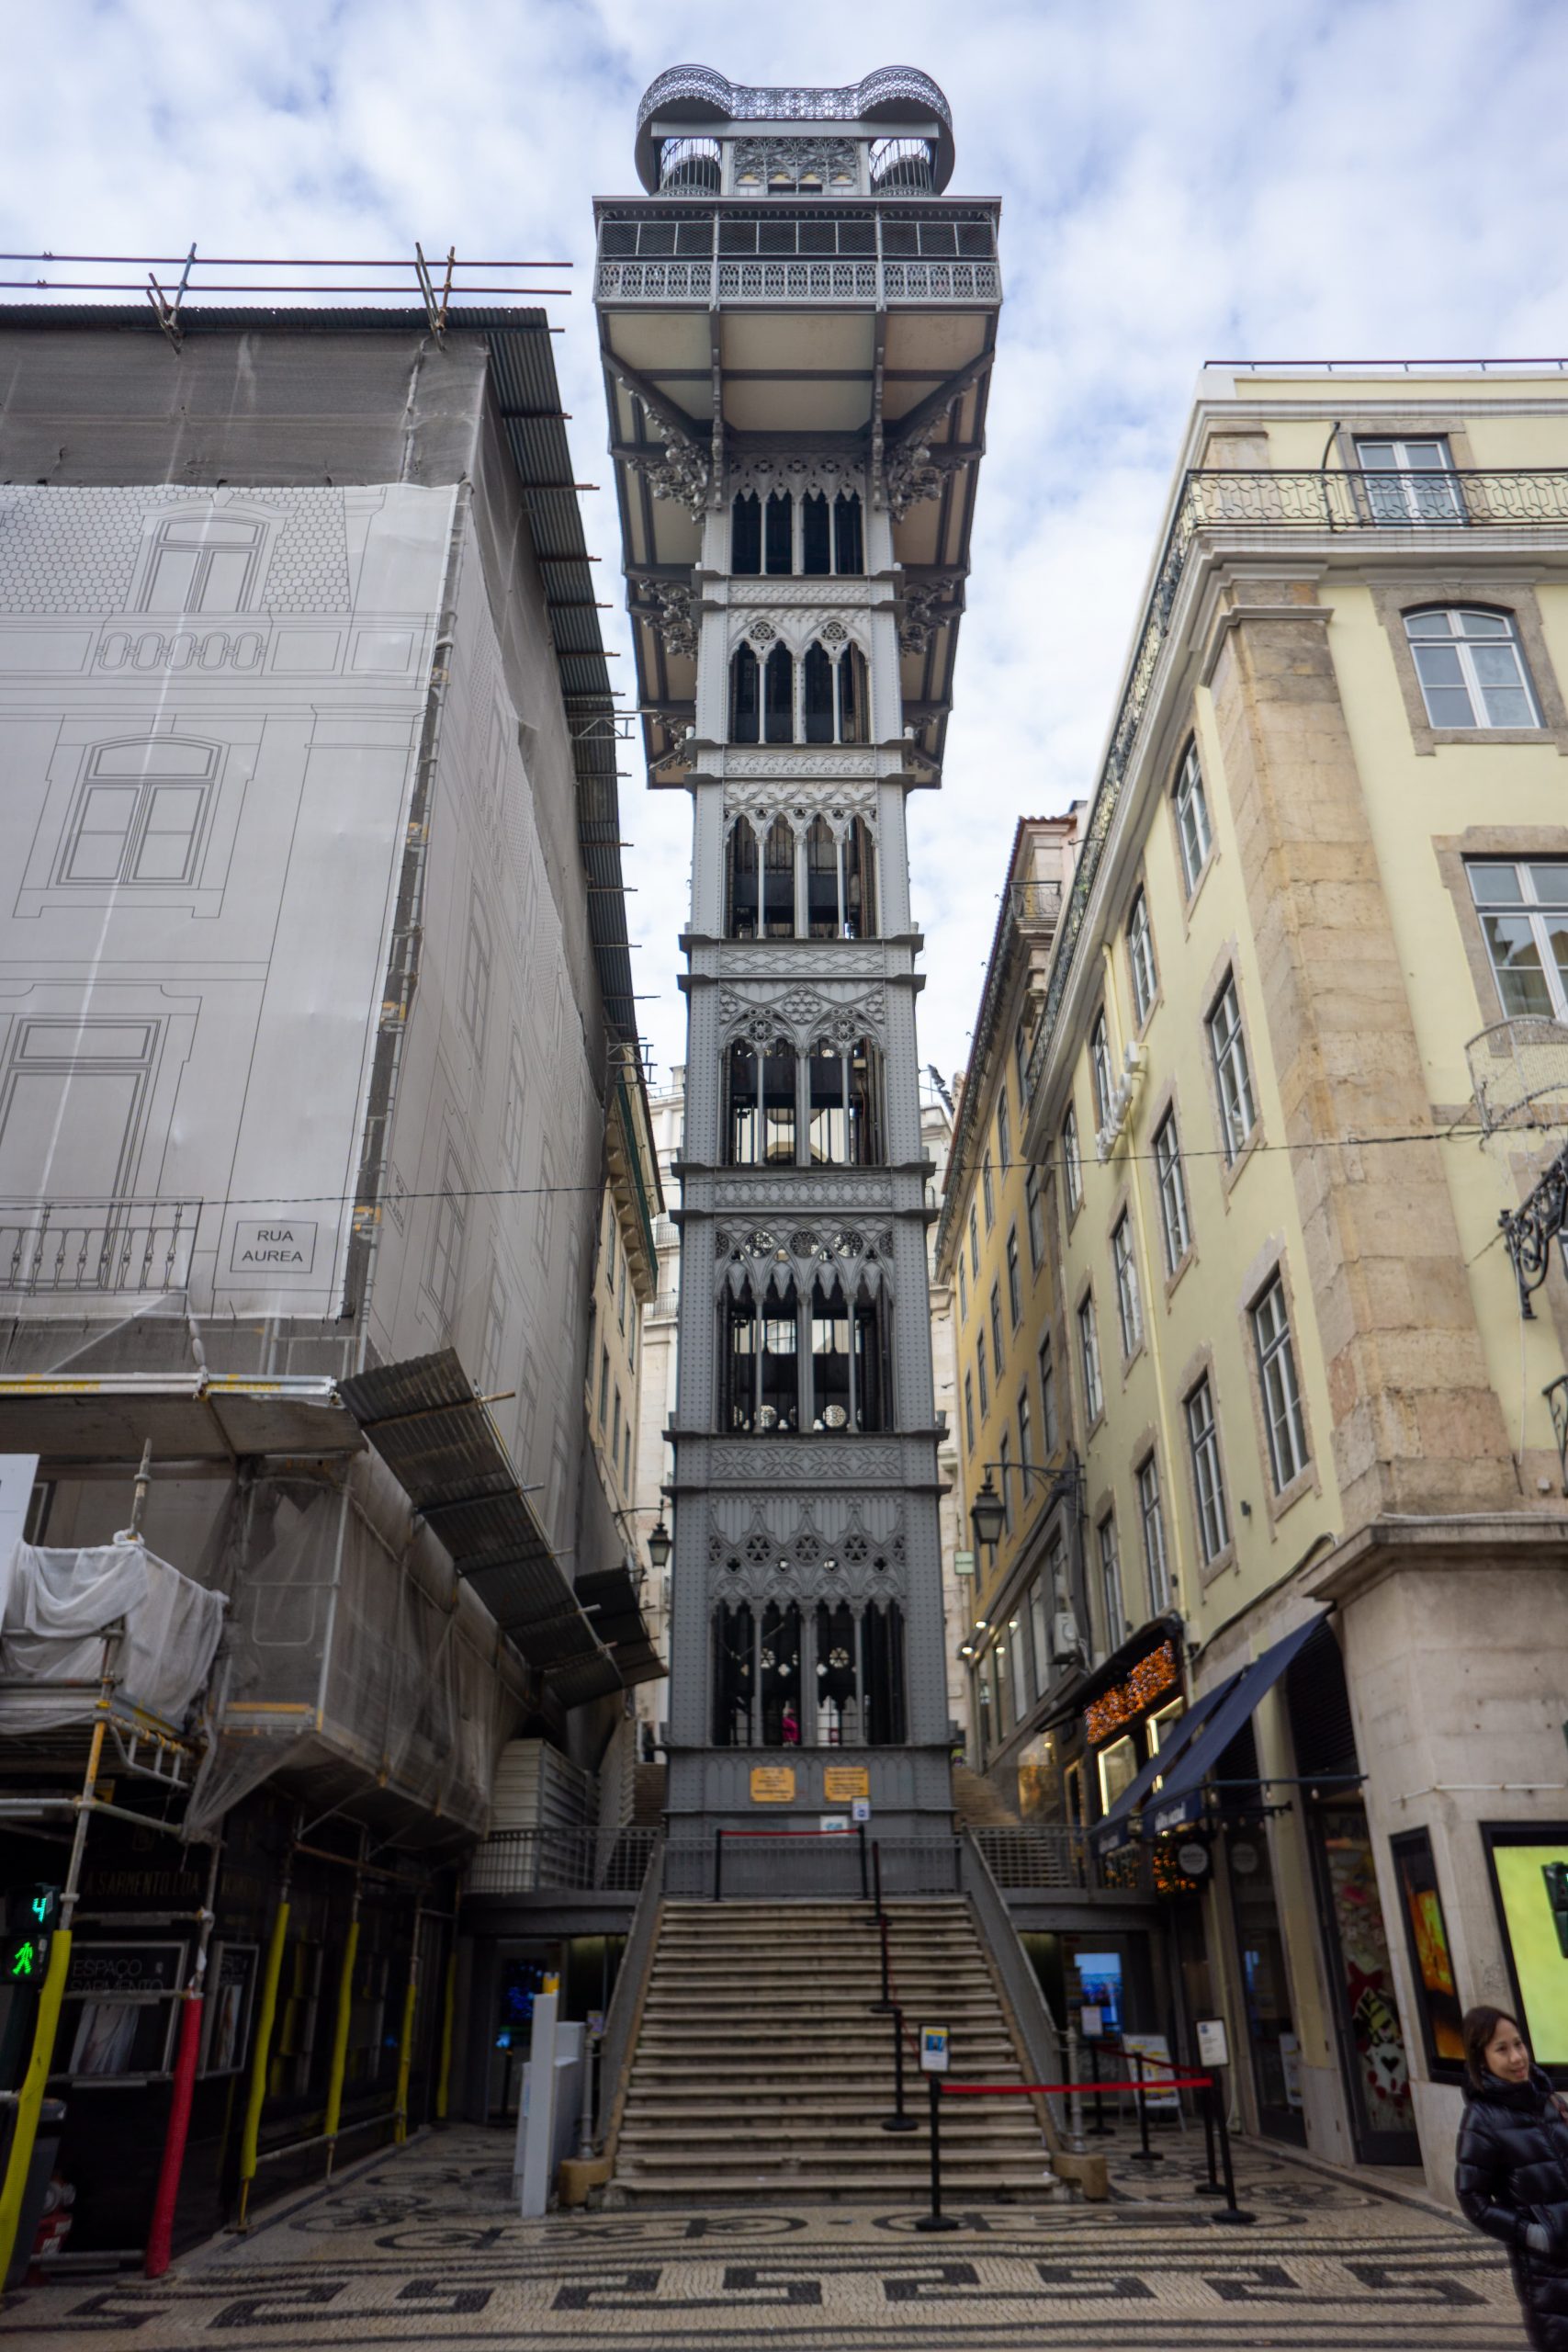 Santa Justa Elevator exterior view from the bottom